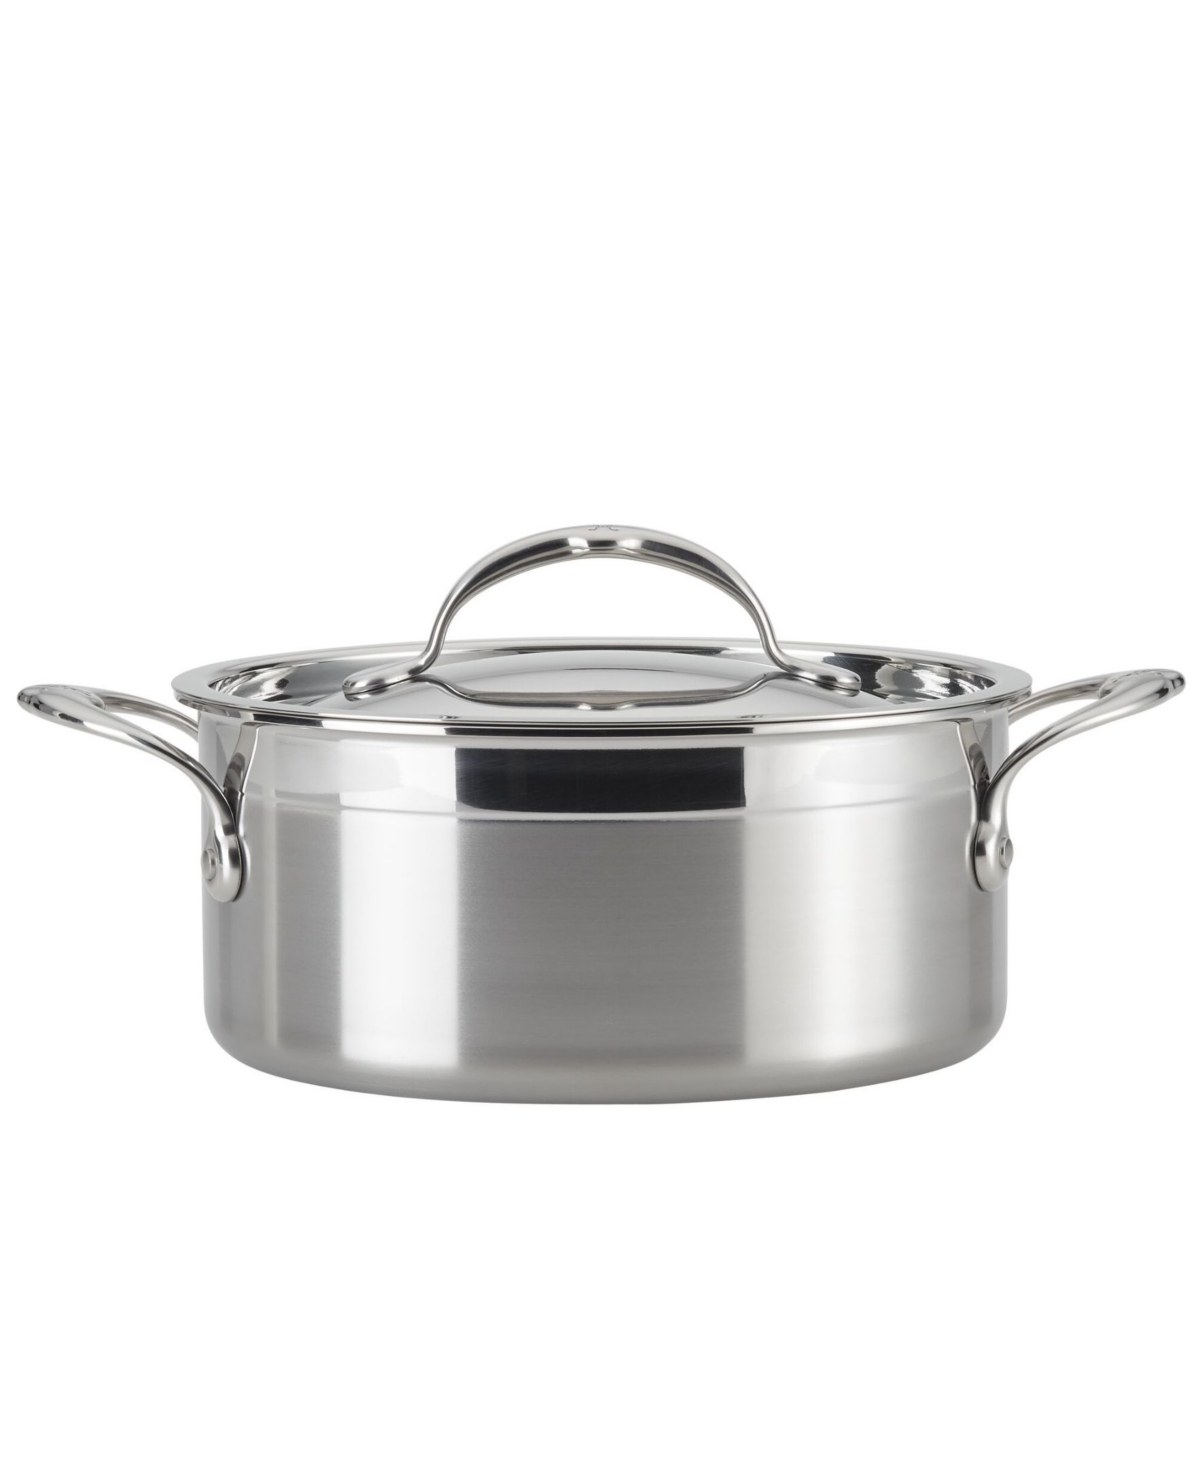 Hestan Probond 3 Quart Forged Stainless Steel Covered Soup Pot